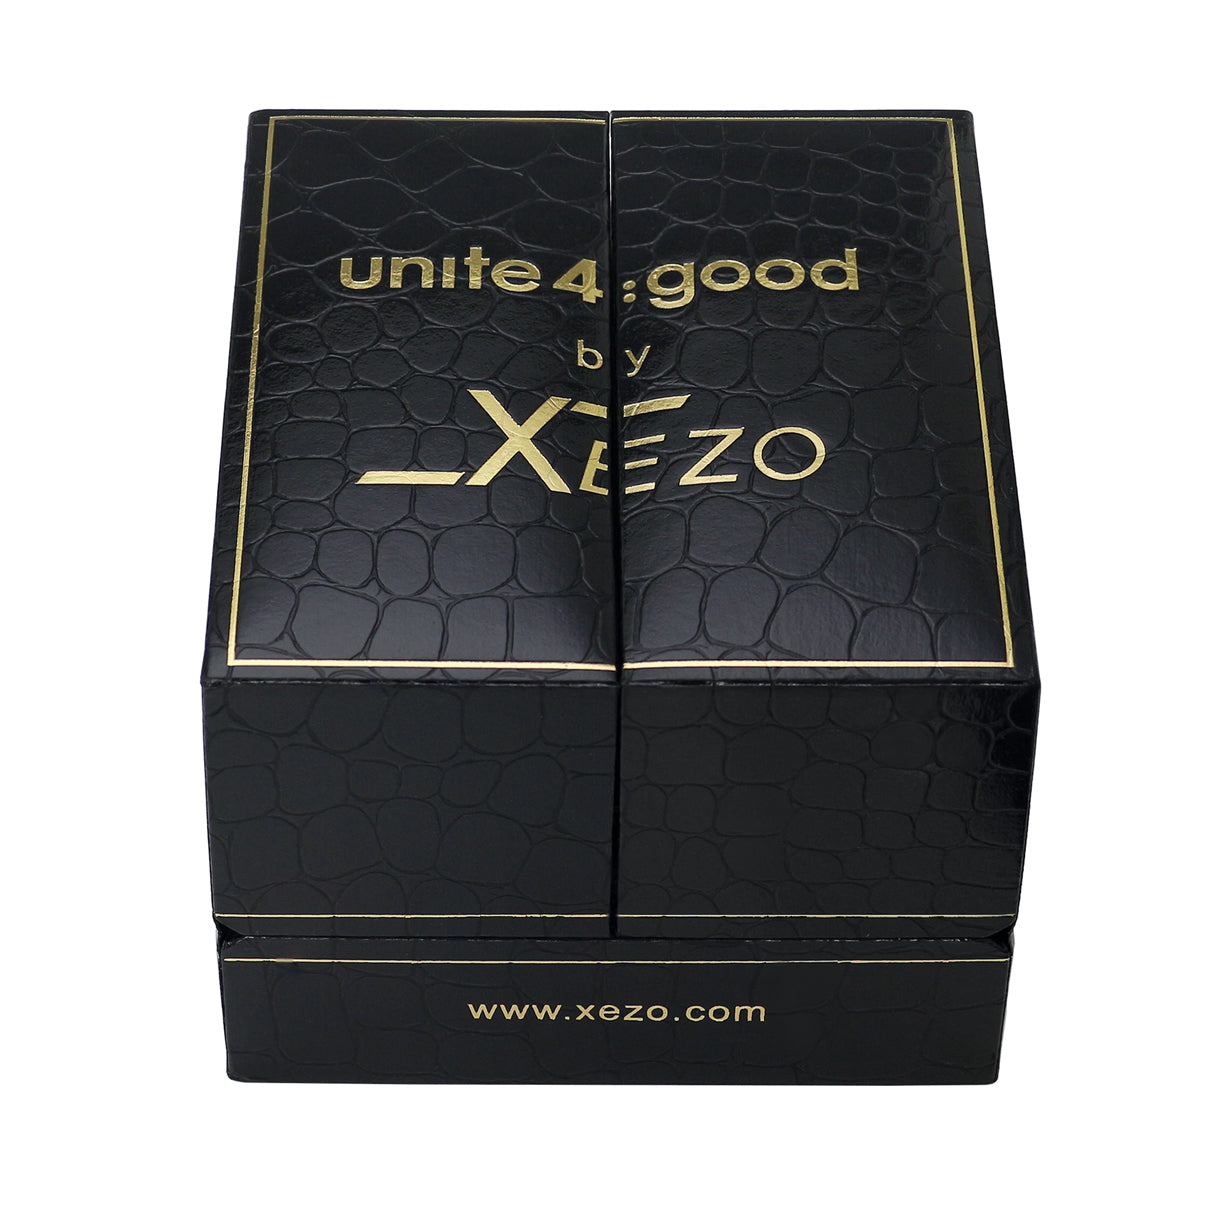 Xezo - Black gift box of the Air Commando D45-BL watch with "unite 4: good by Xezo" printed on top and "www.xezo.com" printed on the front